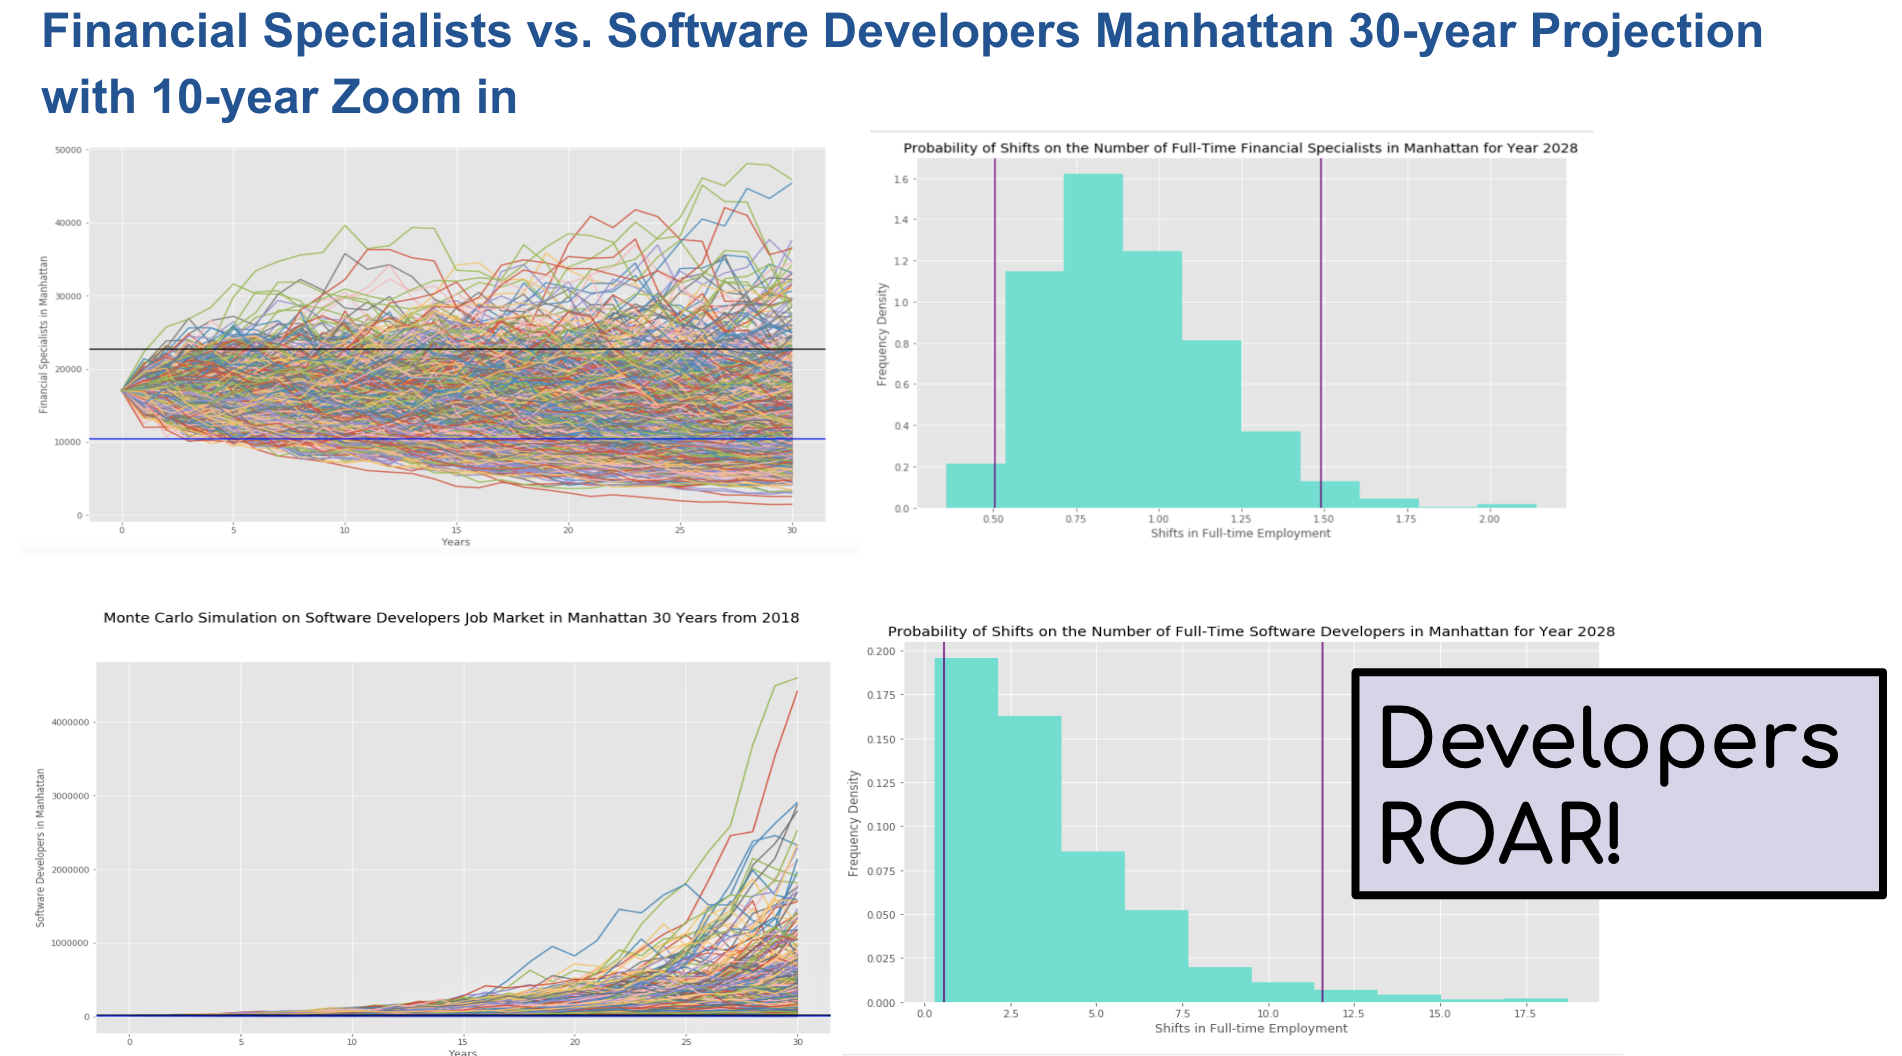 Trajectory Comparison of Full-time Financial Specialists vs. Software Developers in Manhattan